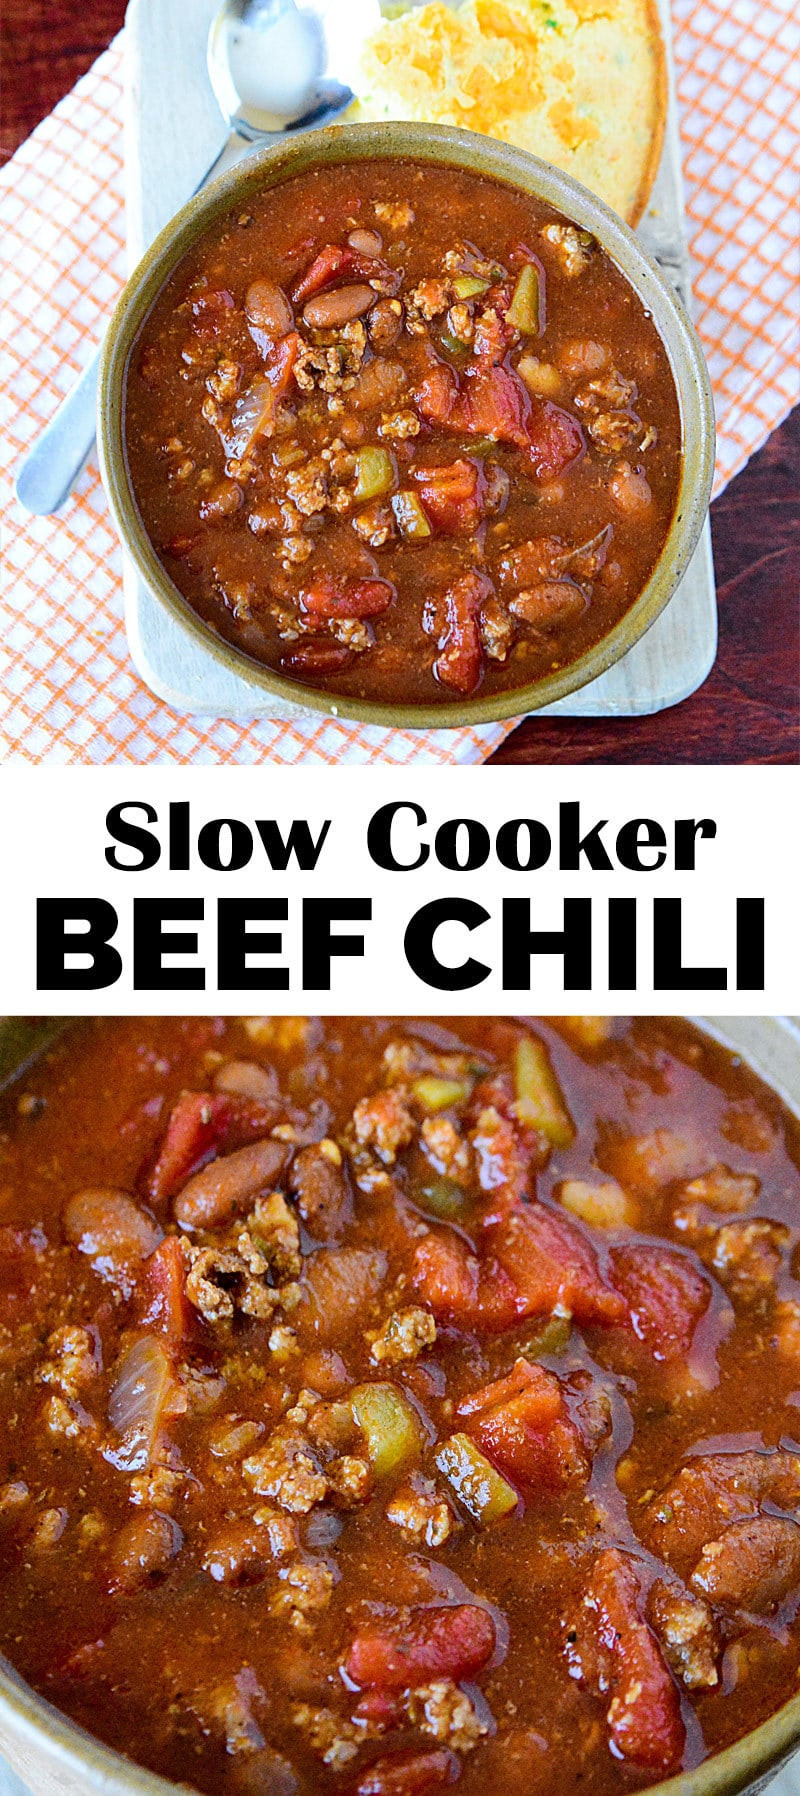 Easy Ground Beef Slow Cooker Recipes
 Slow Cooker Beef Chili Recipe